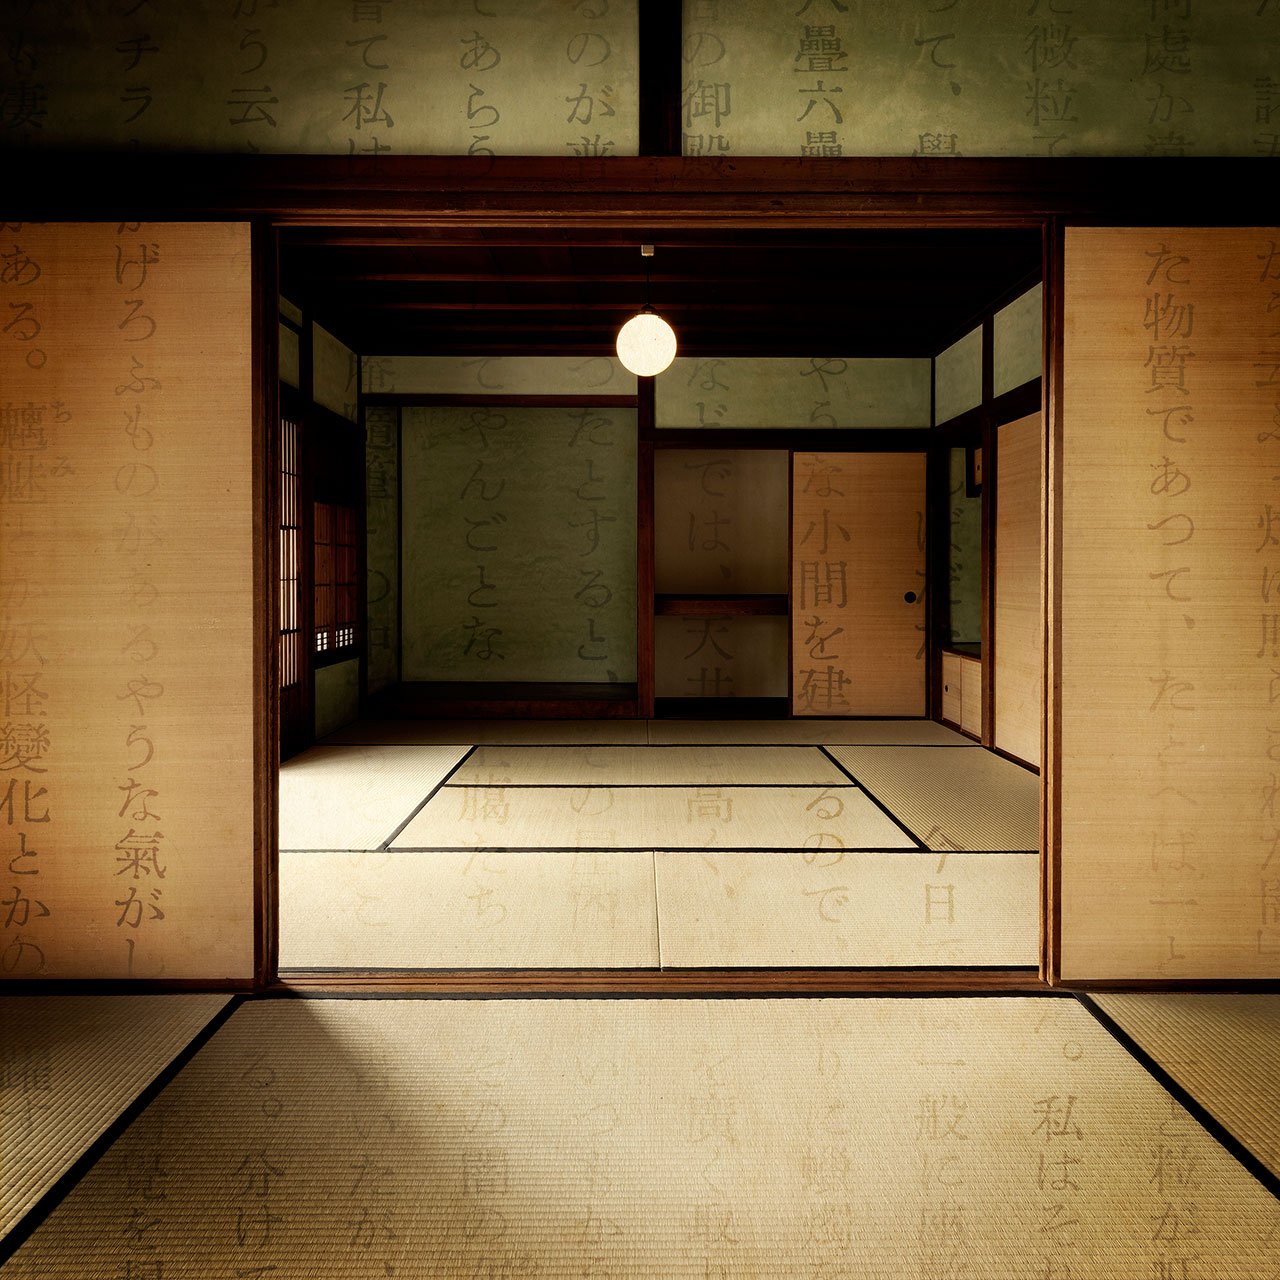 Inês d'Orey, House of Koide, 1925. By Sutemi Horiguchi Transplanted House, from Nishikata, restored in 1998. 80x80cm. Photographic Fine Art Print.